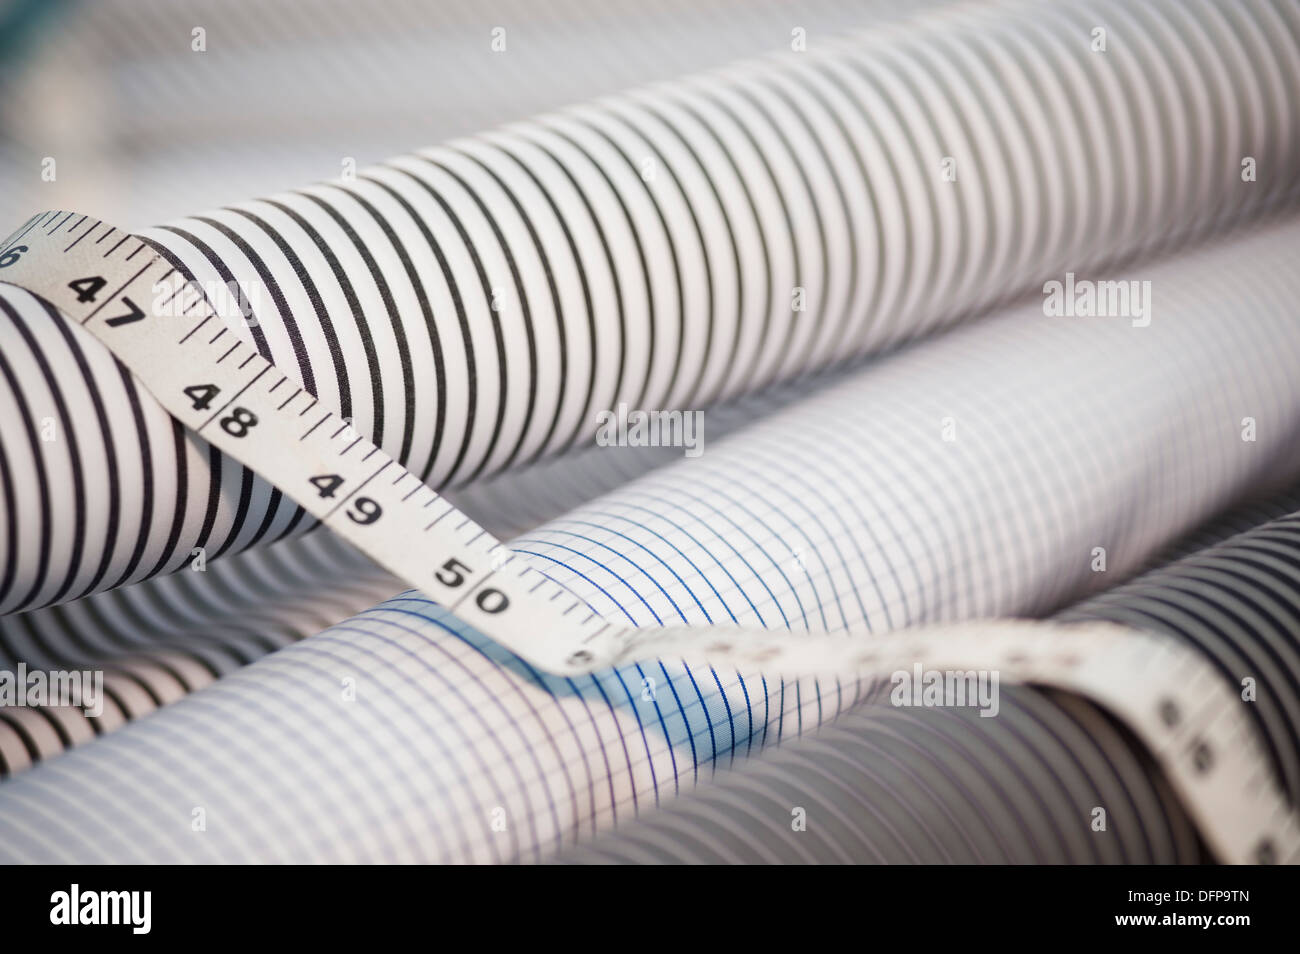 Close-up of tape measure on spools of fabric Stock Photo